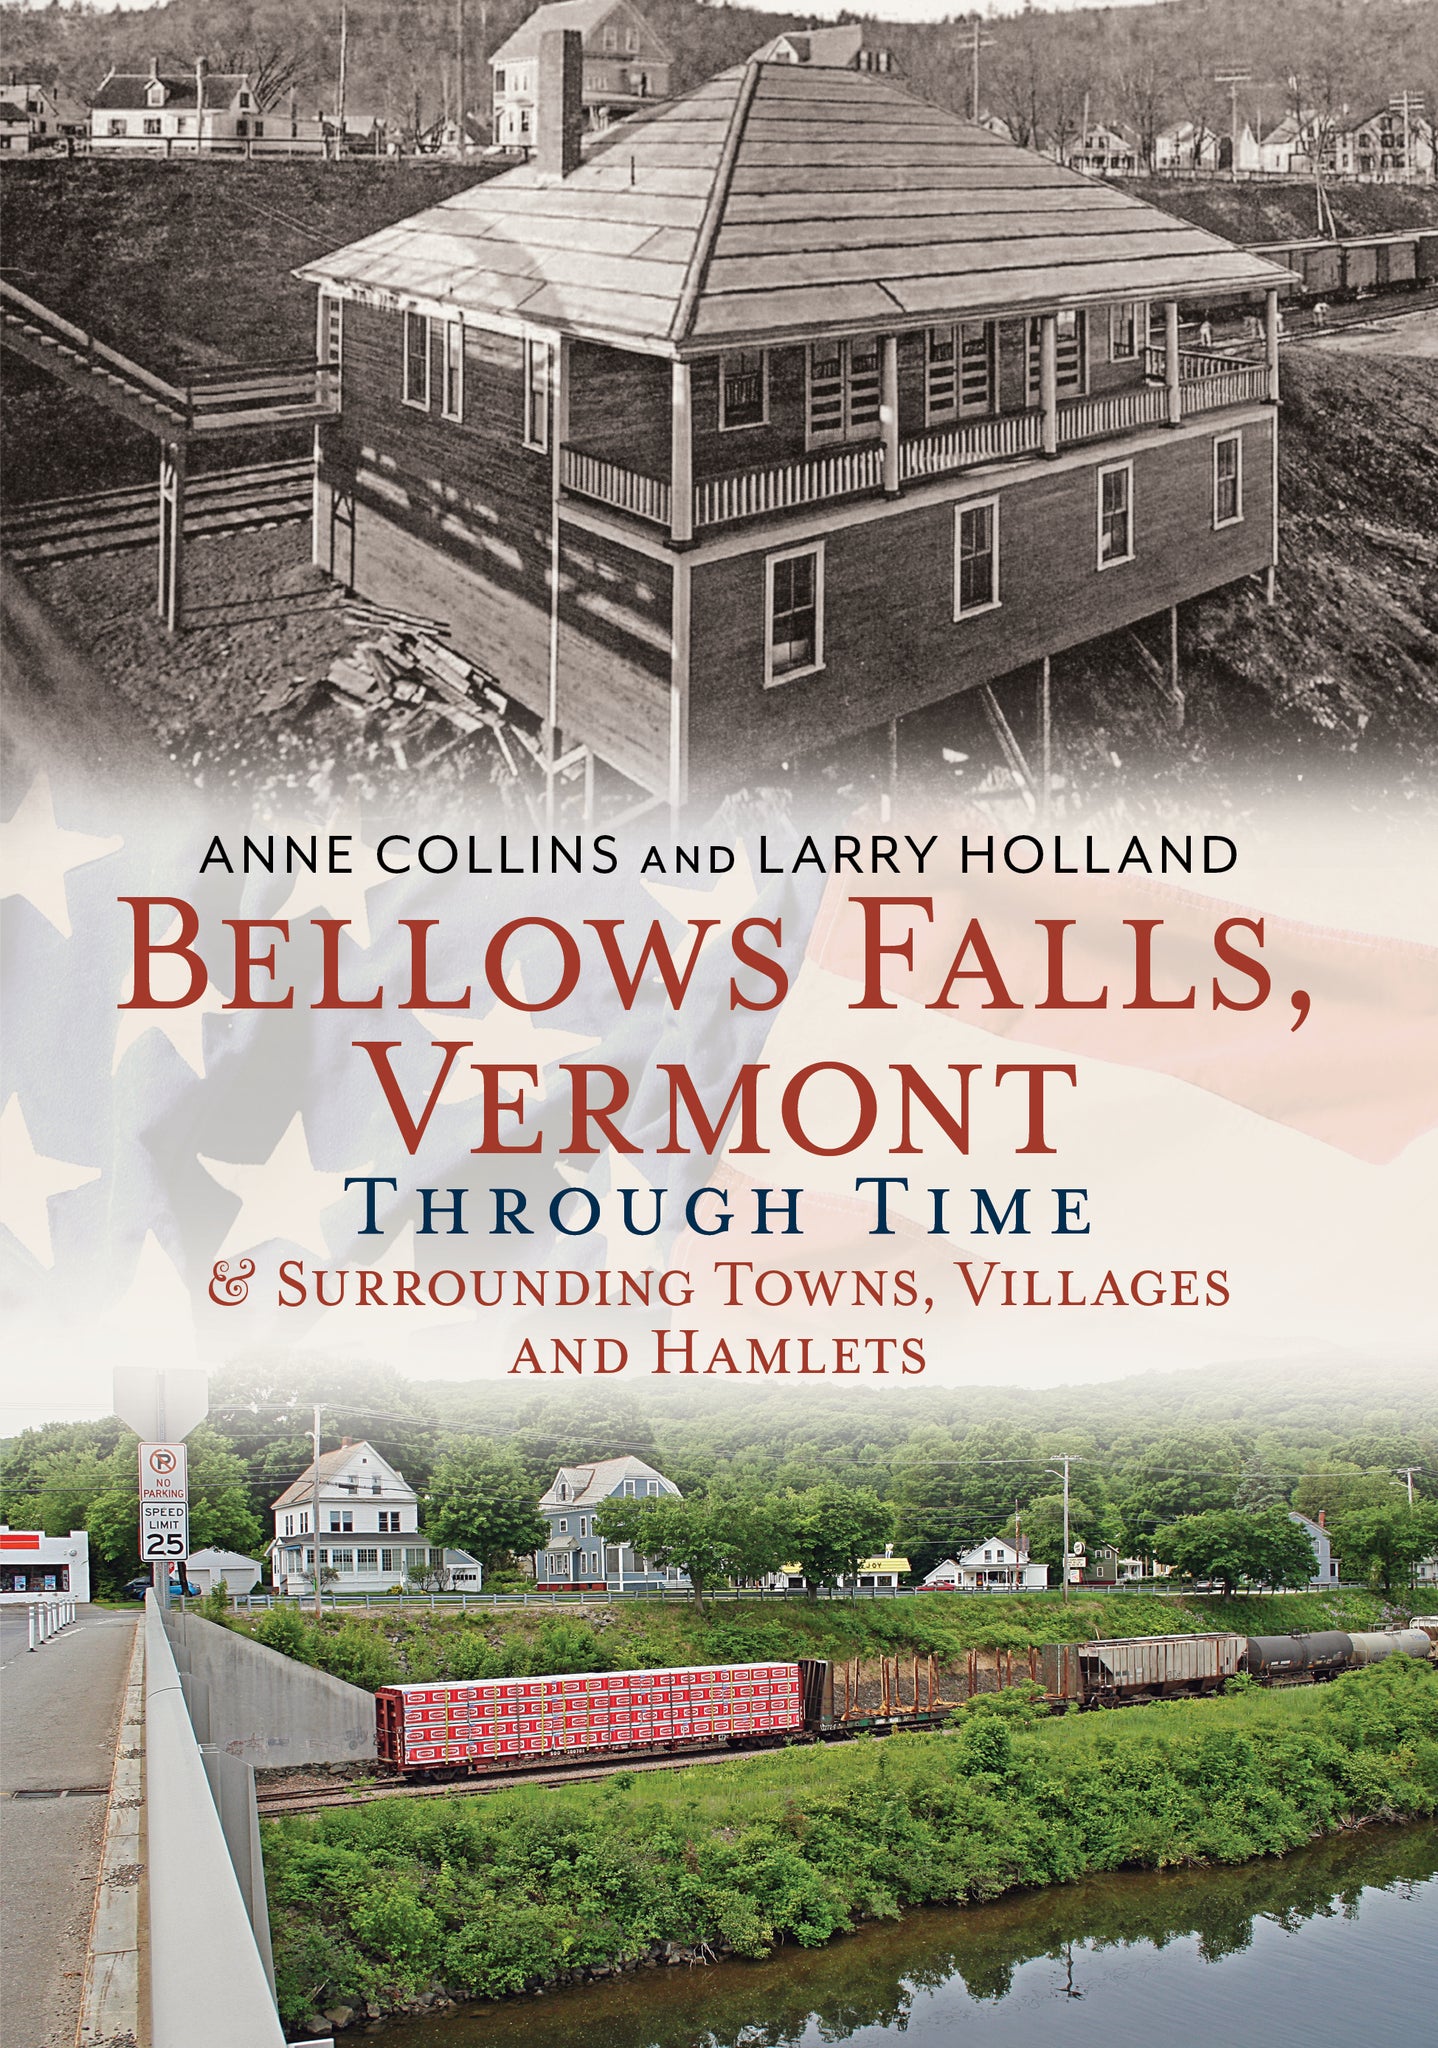 Bellows Falls, Vermont Through Time & Surrounding Towns, Villages and Hamlets - published by Americat Through Time